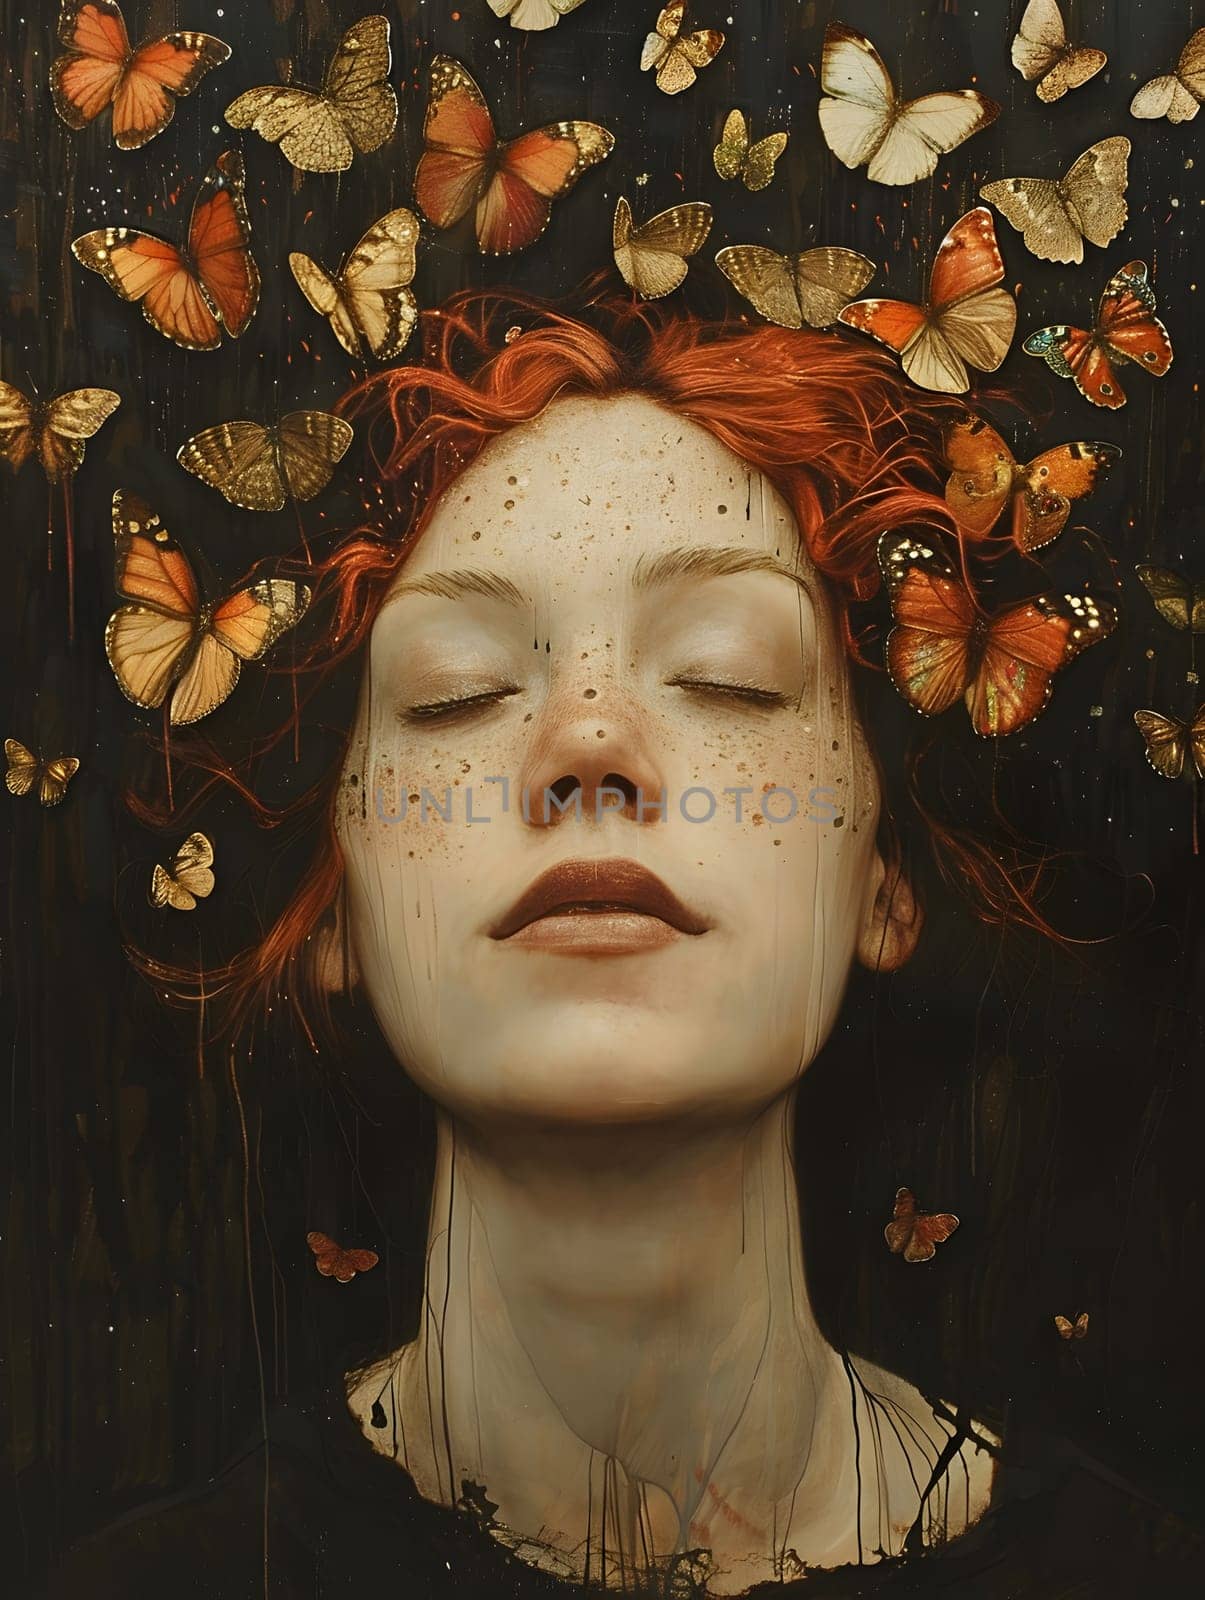 Redhaired woman with freckles has butterflies around her head by Nadtochiy